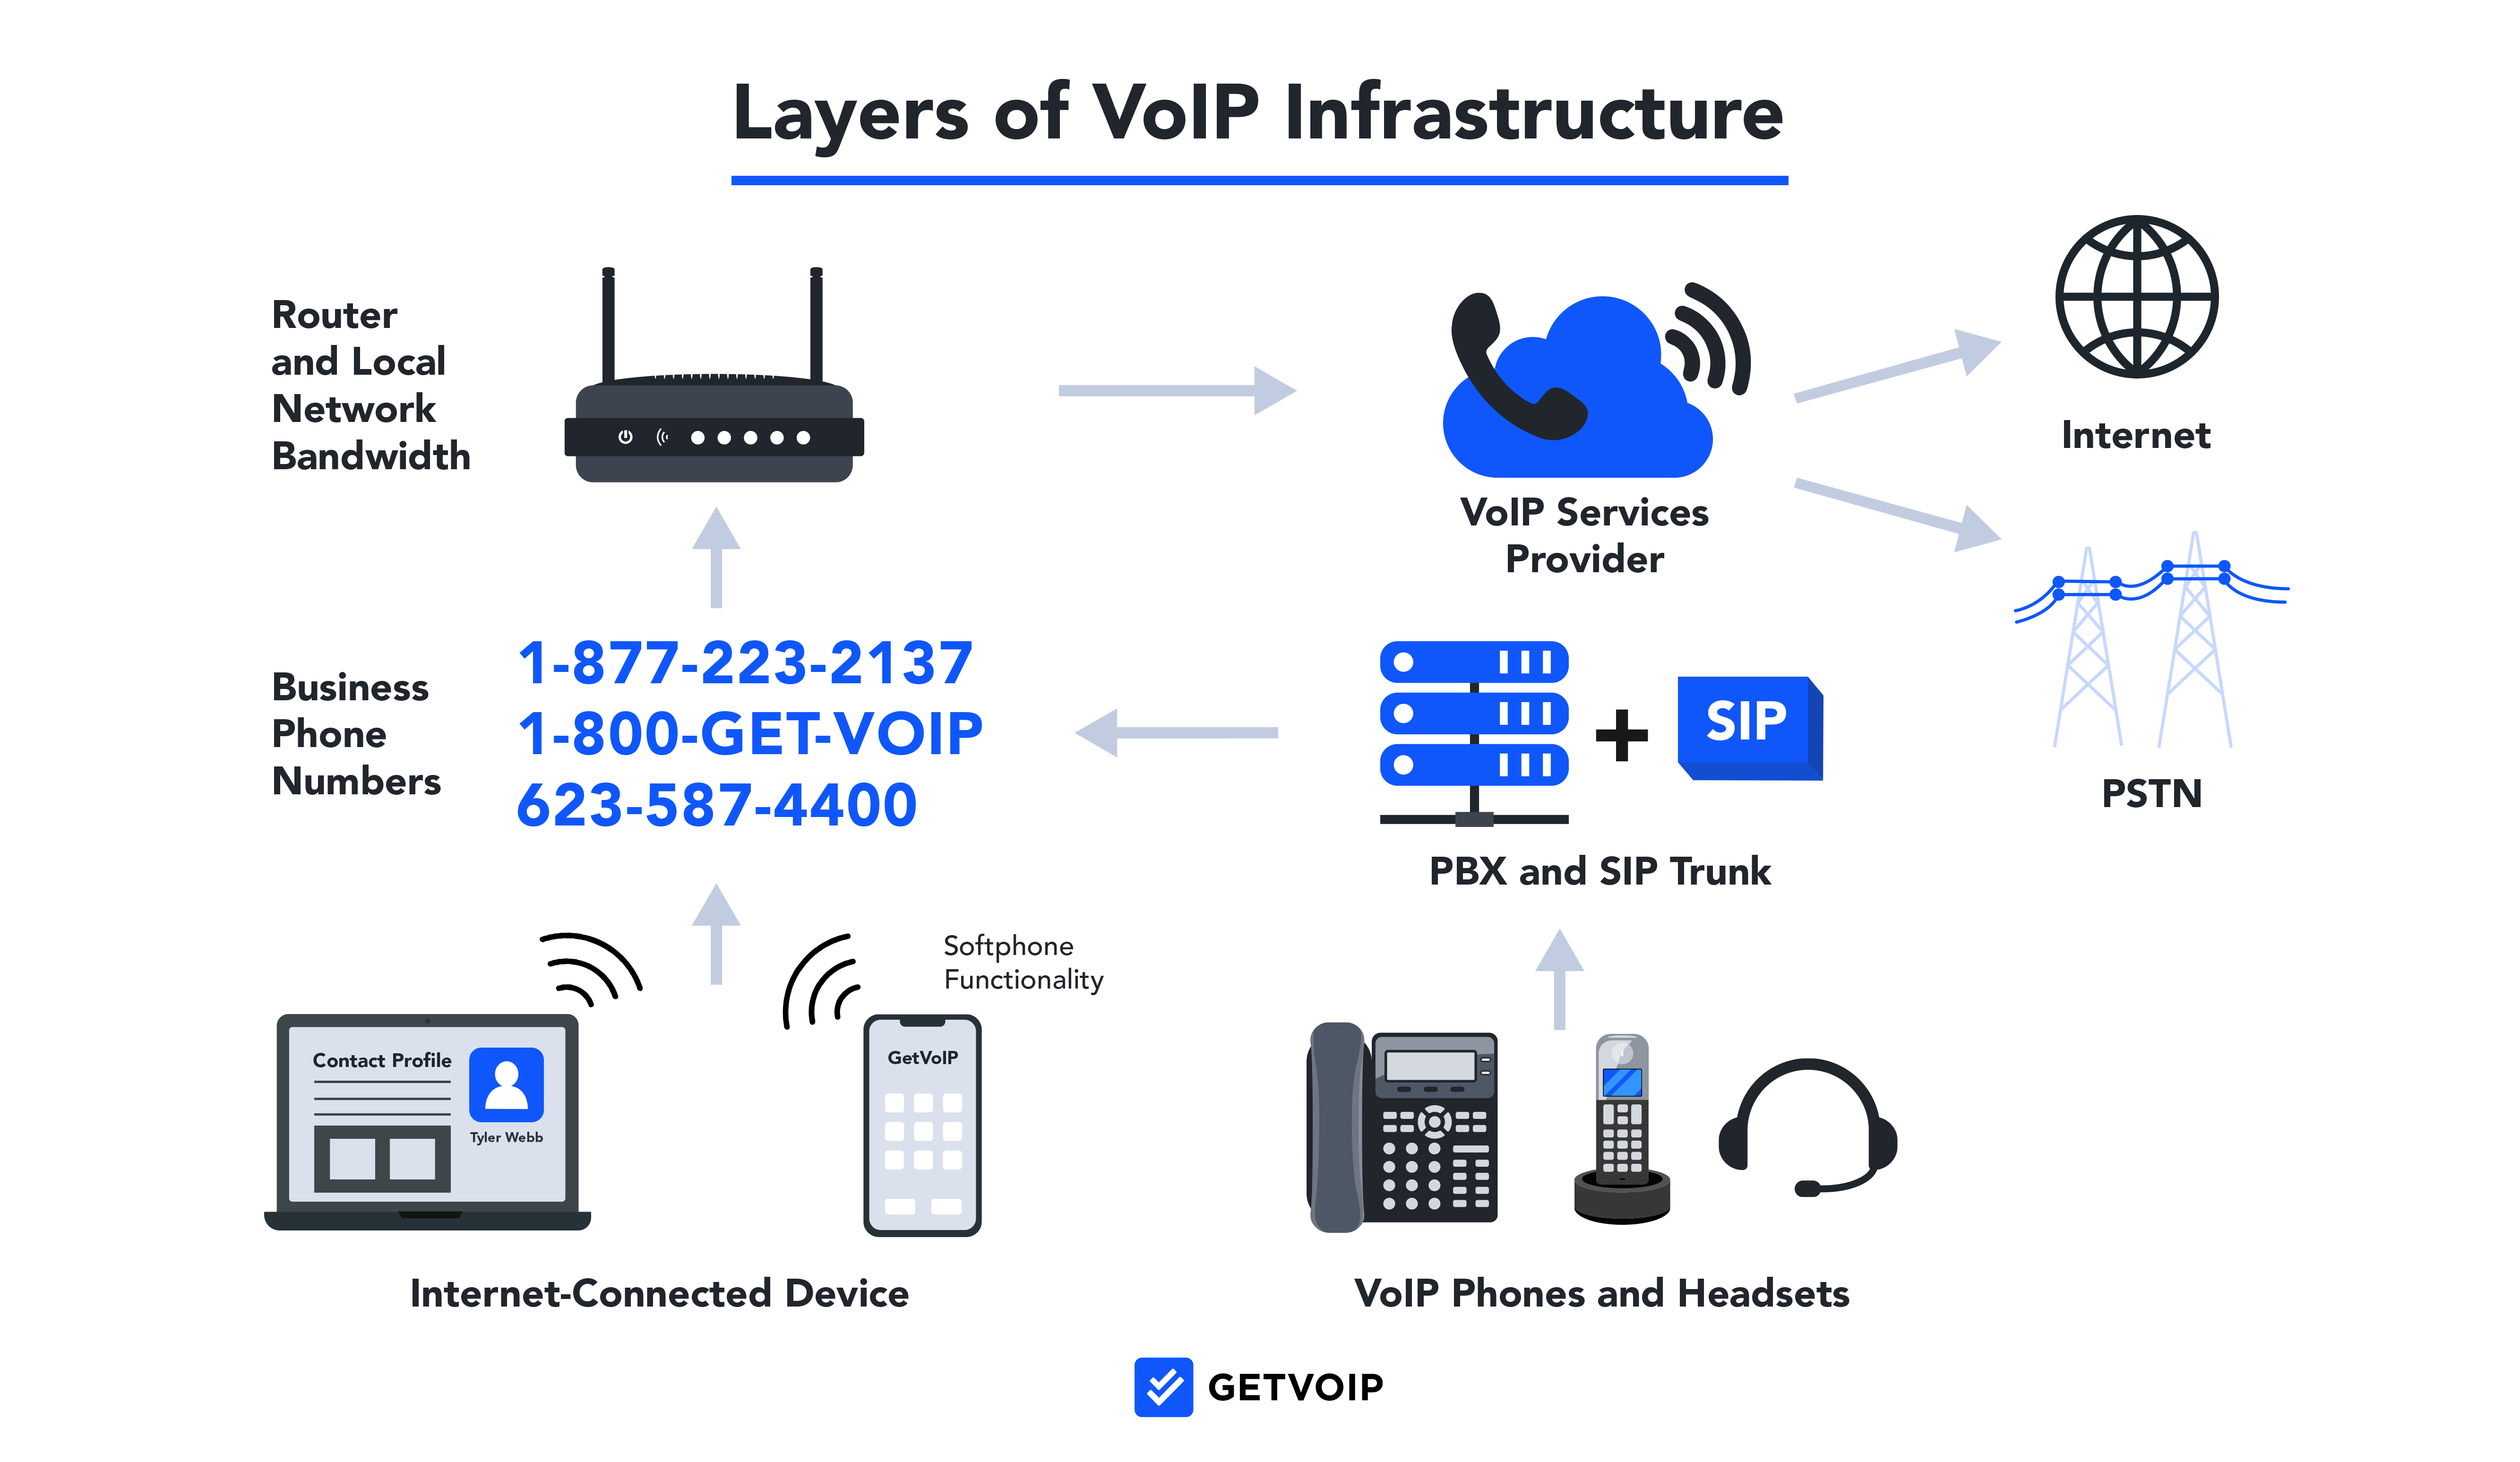 Layers of VoIP Infrastructure